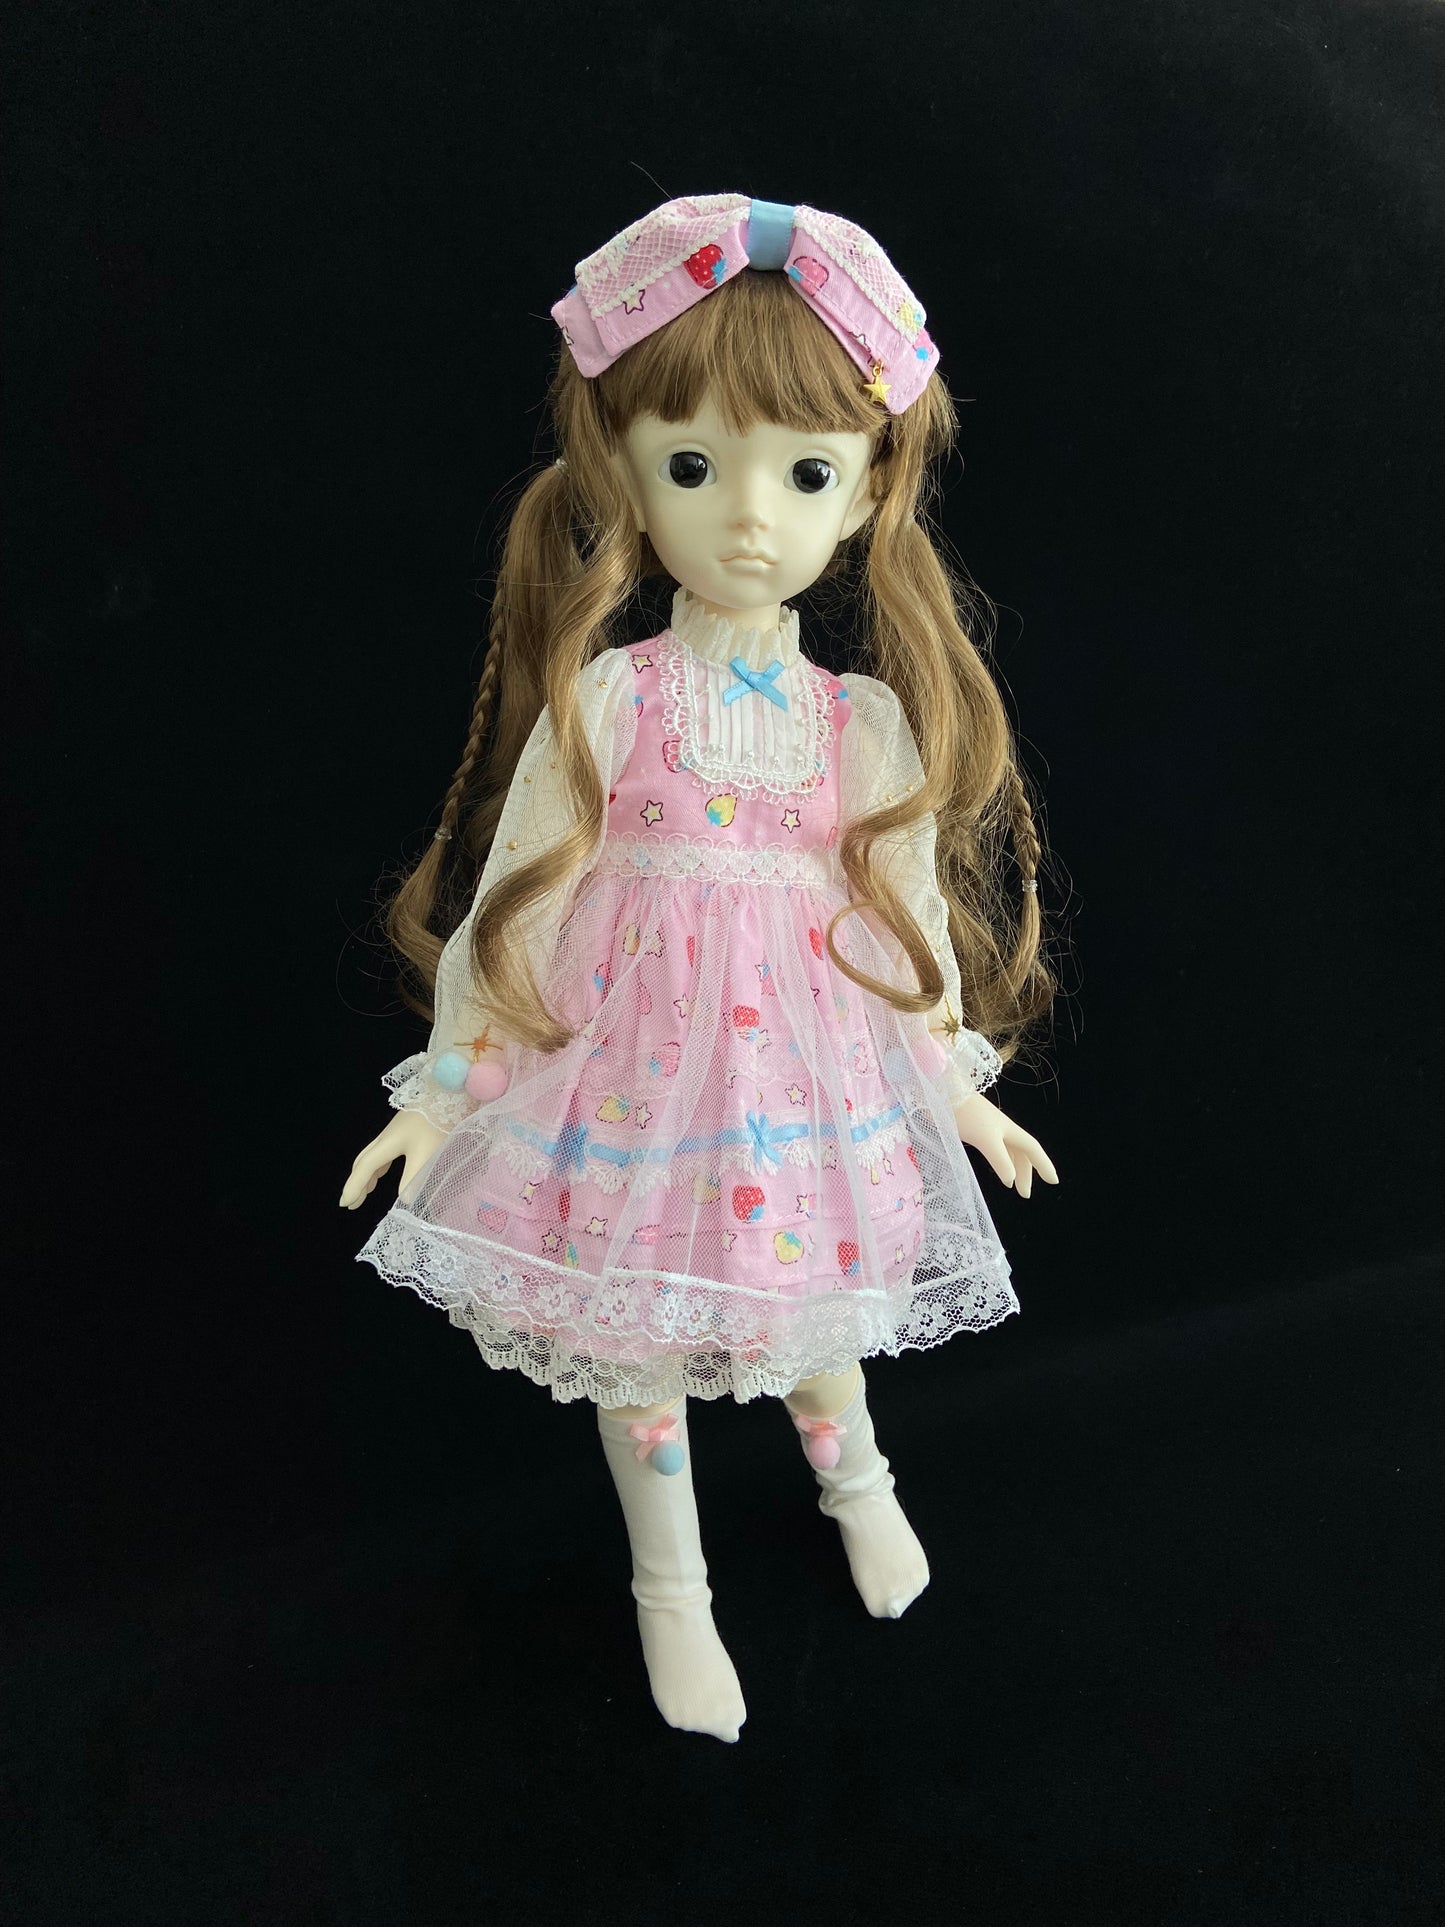 Two 40cm girl dolls without makeup